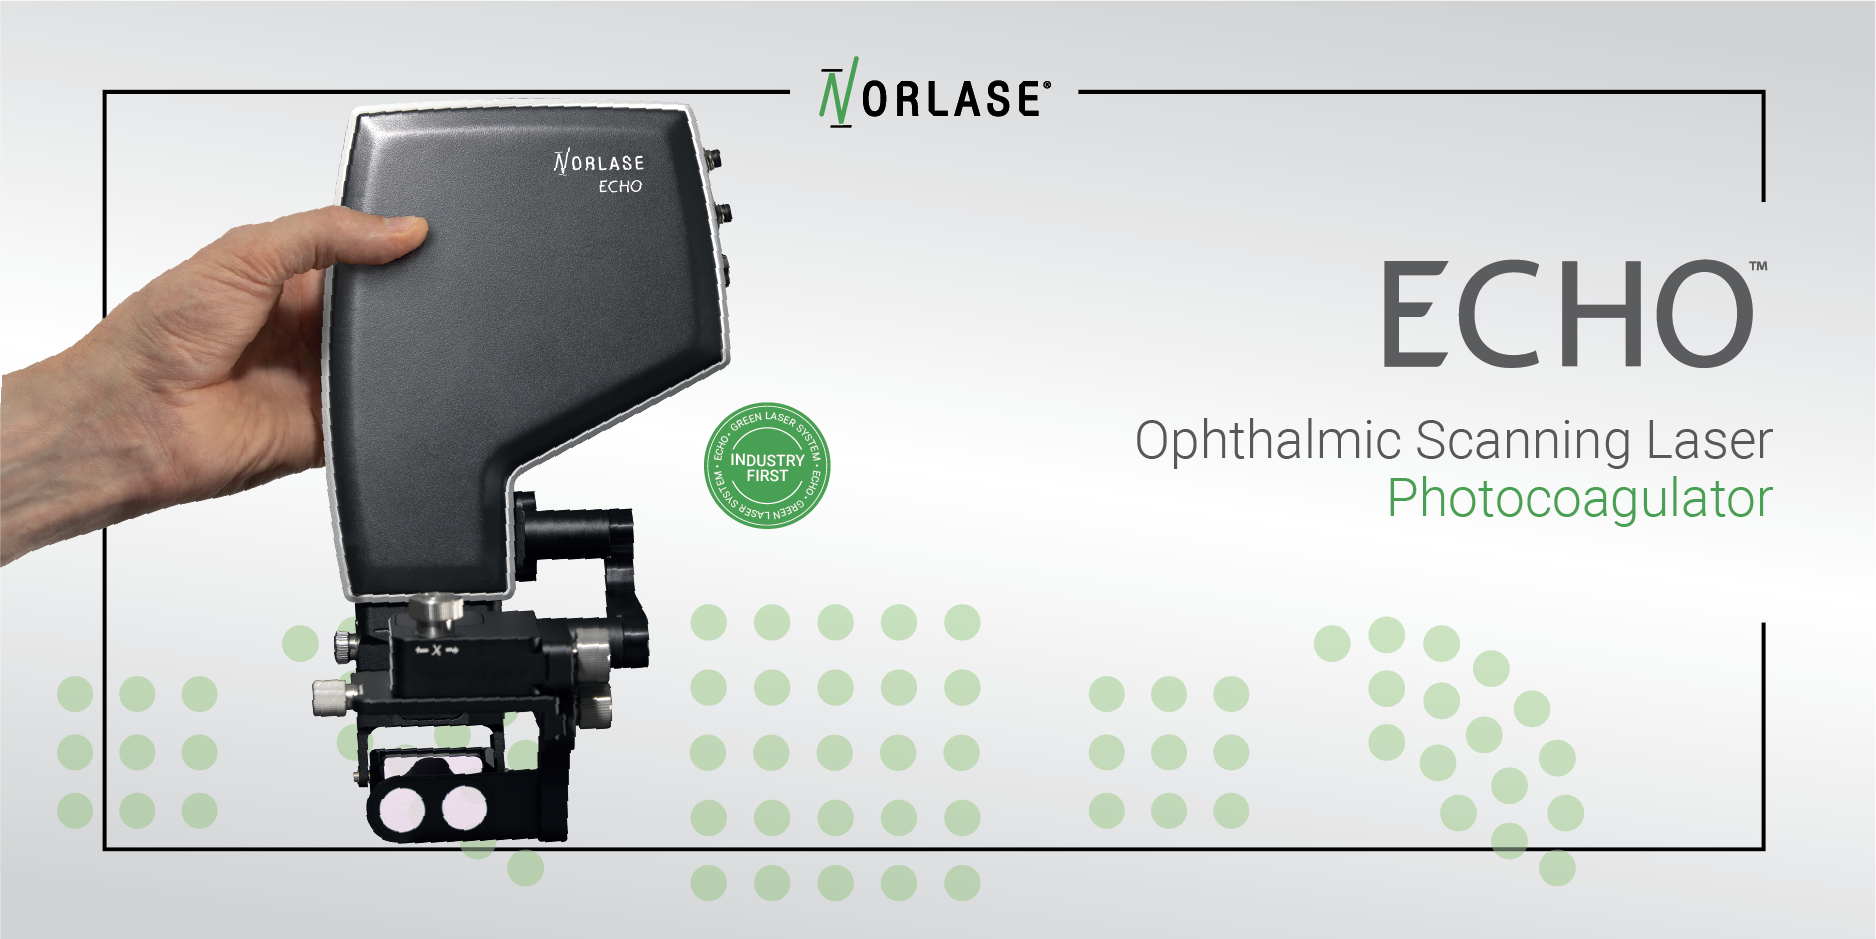 The image shows Norlase pattern scan laser: an innovative tissue-sparing laser equipment